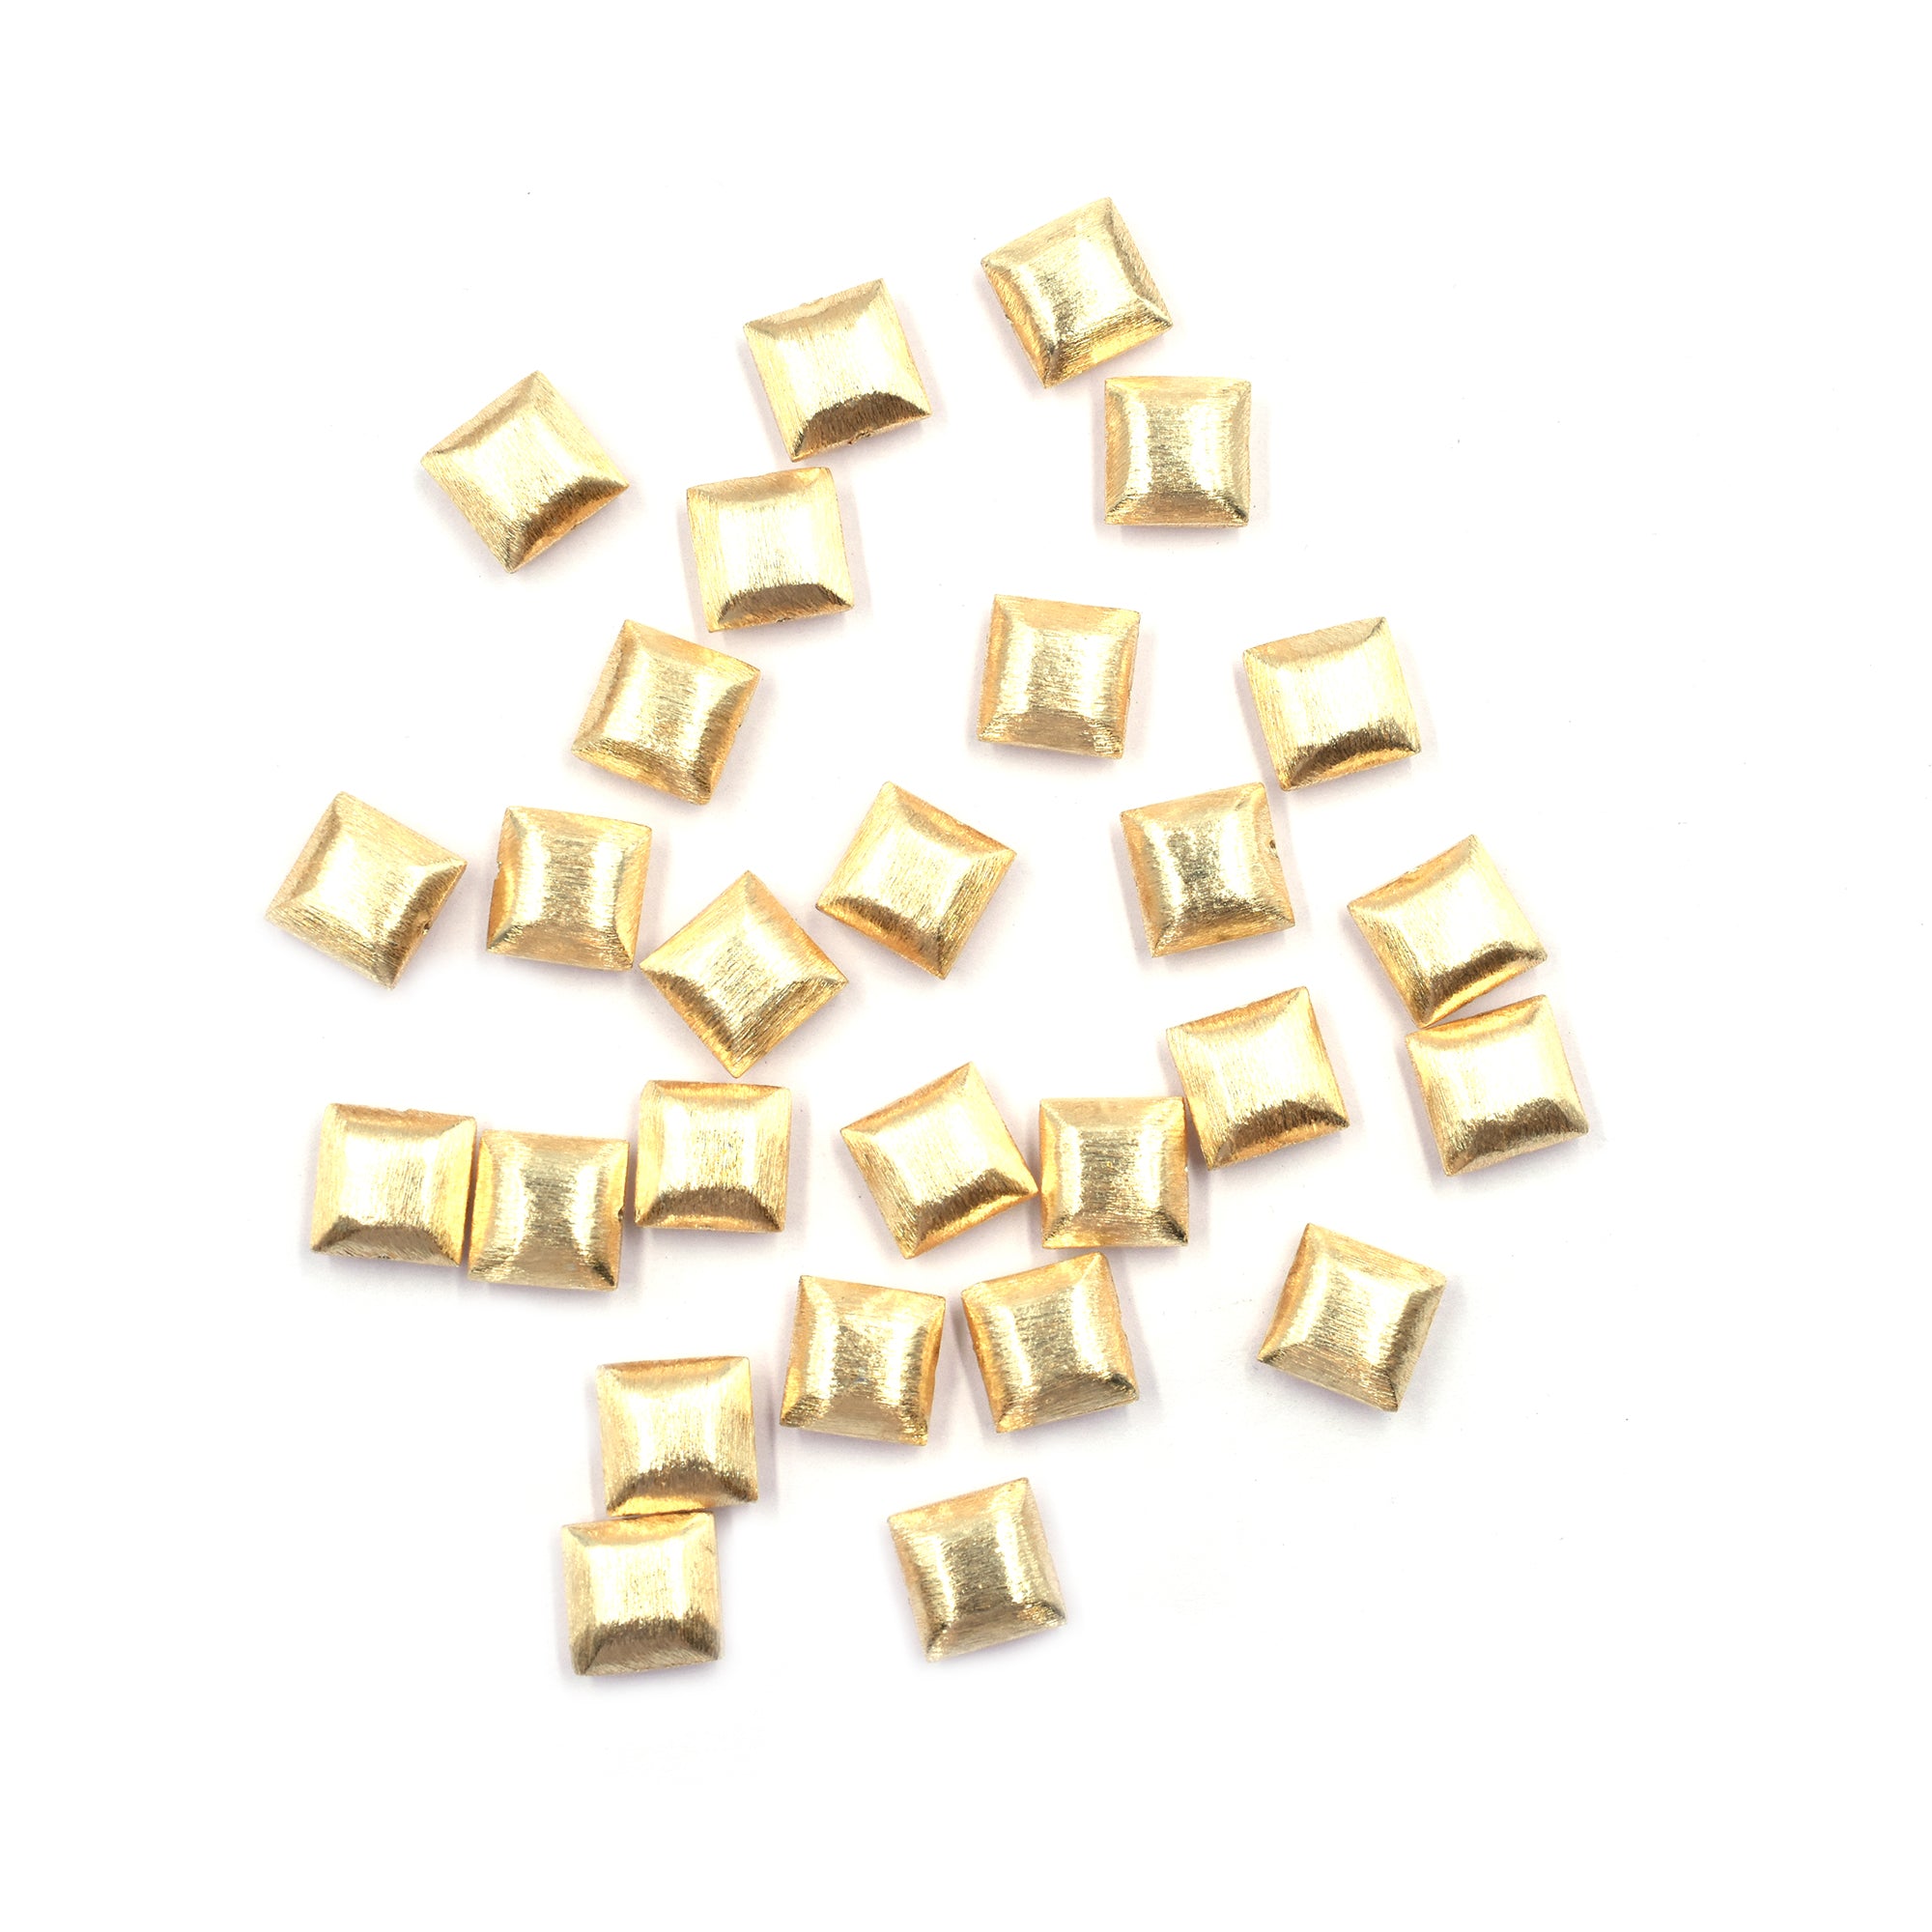 20 Pcs 12mm Cushion Brushed Matte Finish Beads Gold Plated Copper